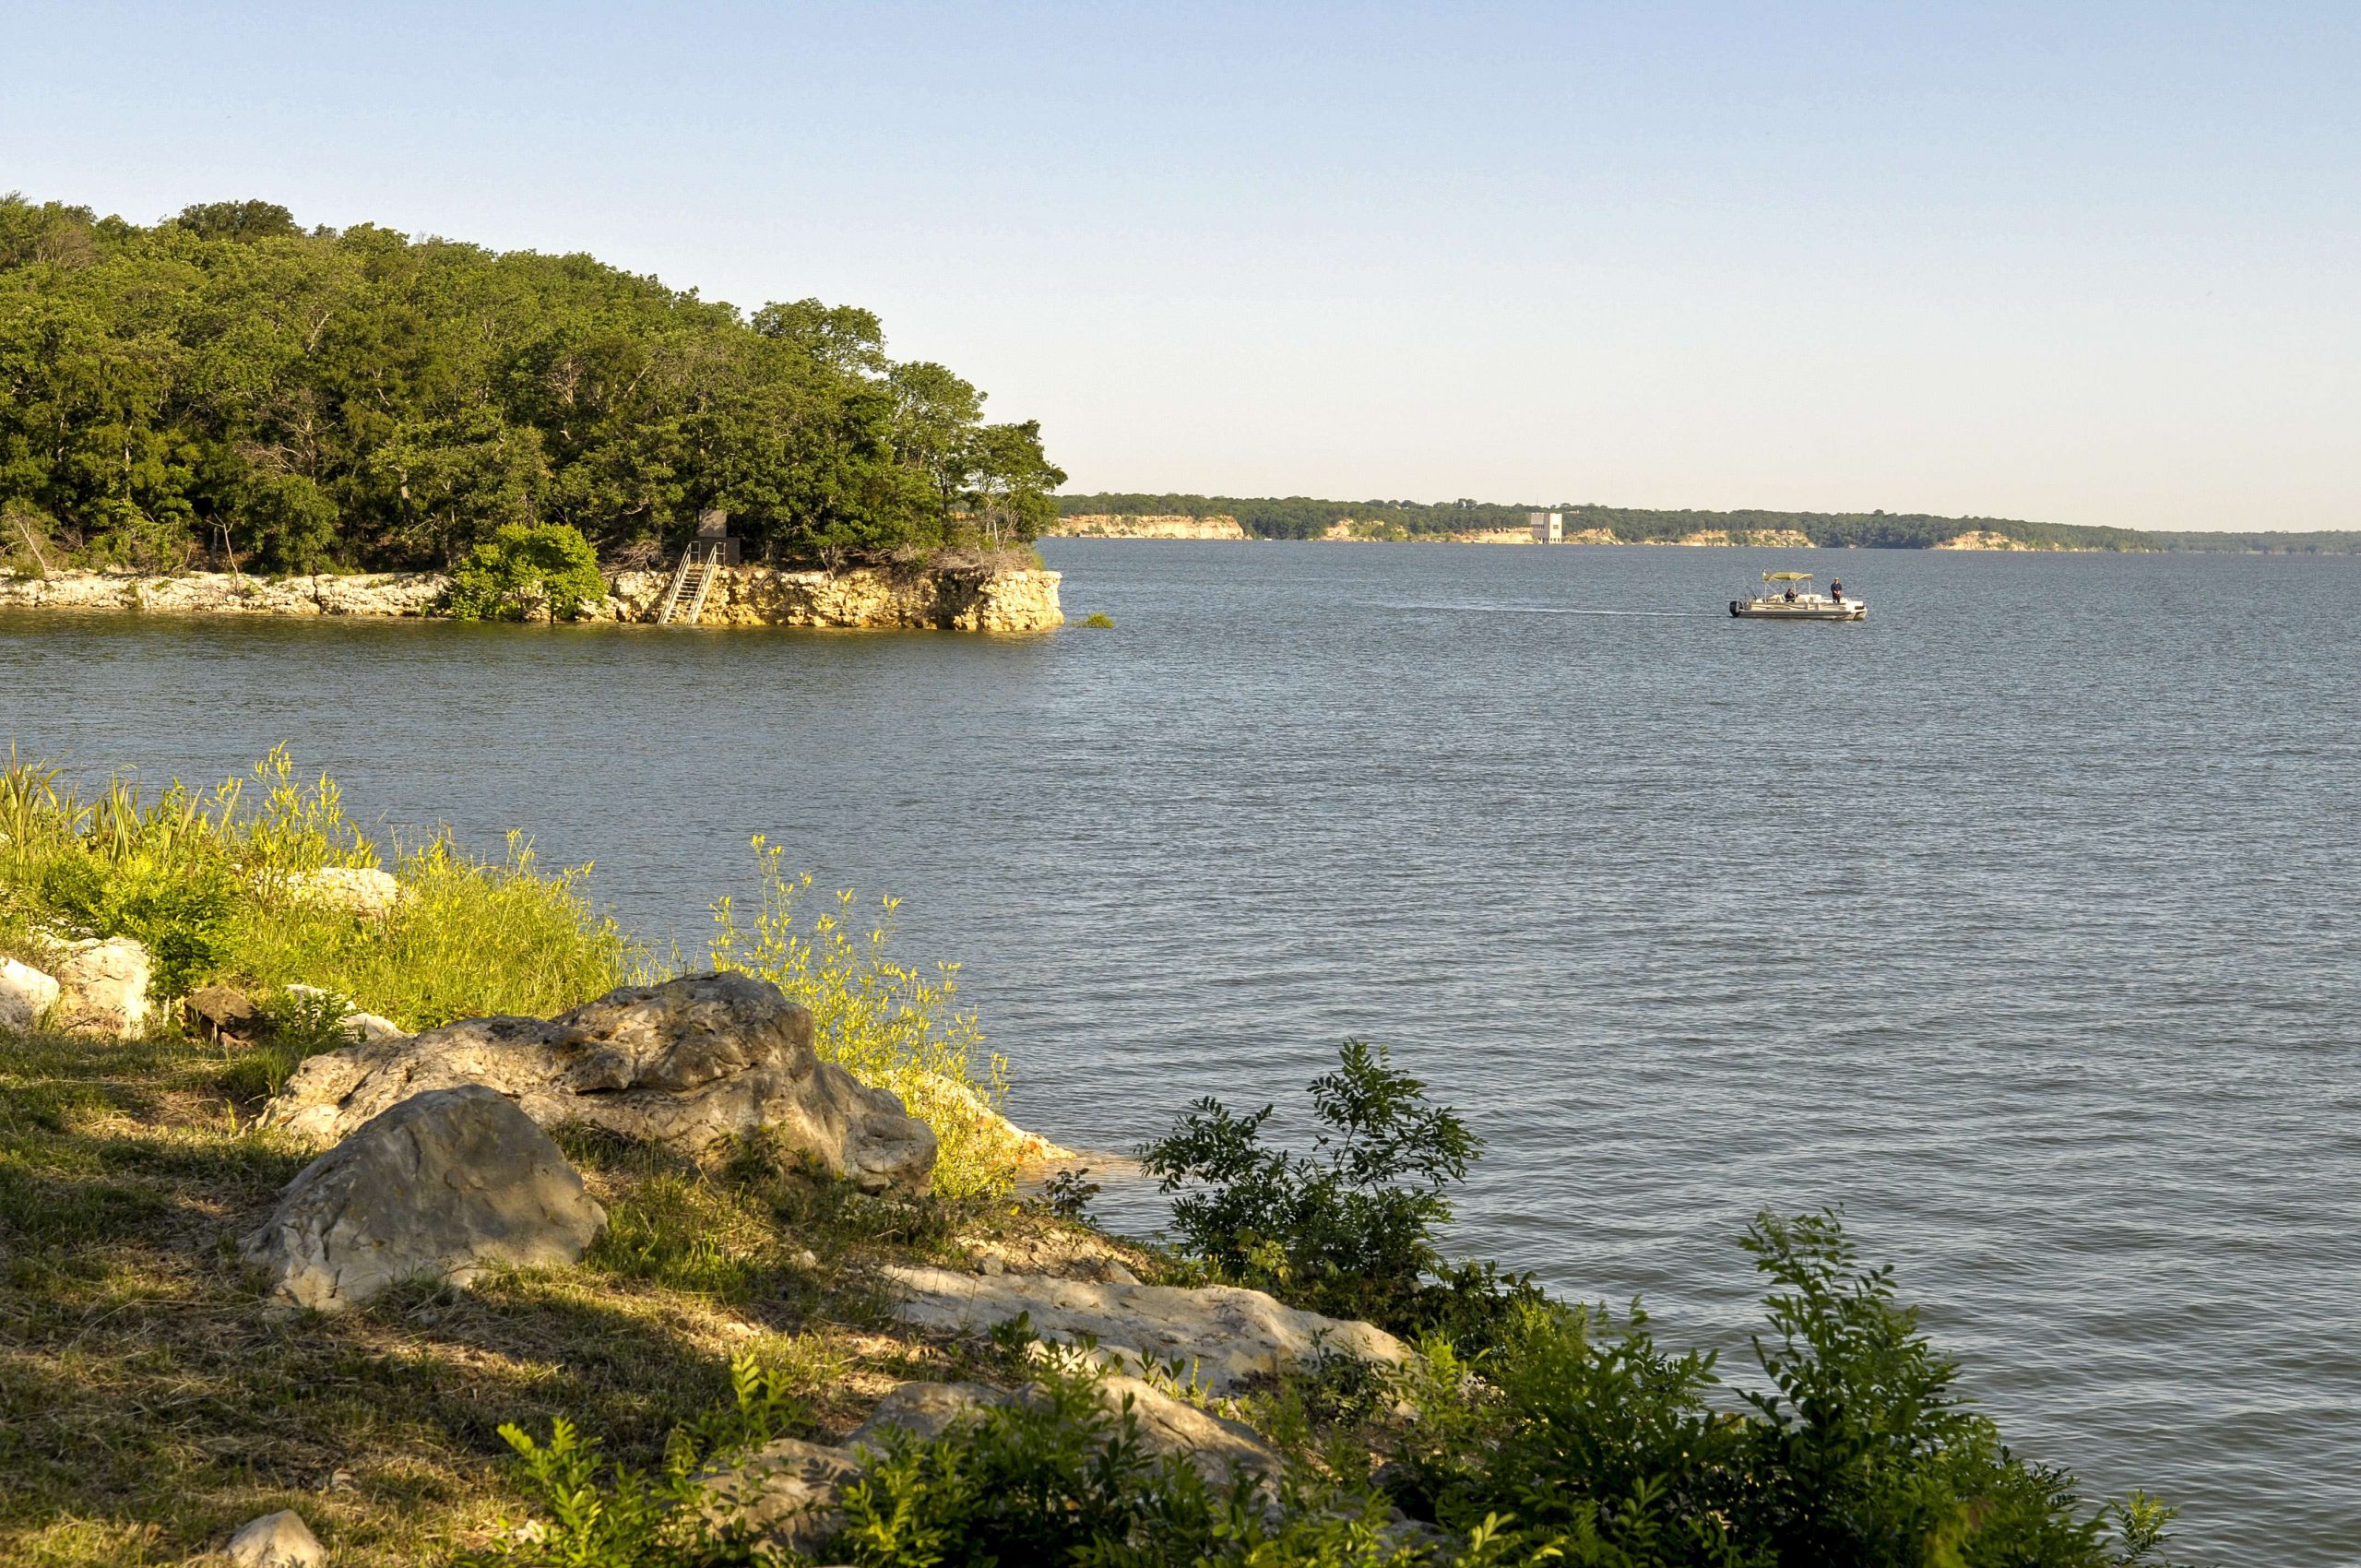 <h4>20. Lake Texoma, Texas/Oklahoma </h4> [89,000 acres] <br>Not only is Texoma one of the largest man-made reservoirs in the U.S, itâs also one of its most consistent bass fisheries. Texoma gets its name from its location on the Red River between Texas and Oklahoma, and it was the leadoff location for the Oklahoma B.A.S.S. Nation state qualifiers in 2021. It took a limit of 17 1/2 pounds to win the one-day event in March. Texas Parks and Wildlife Department reports Texoma has been on fire over the past month, as well.